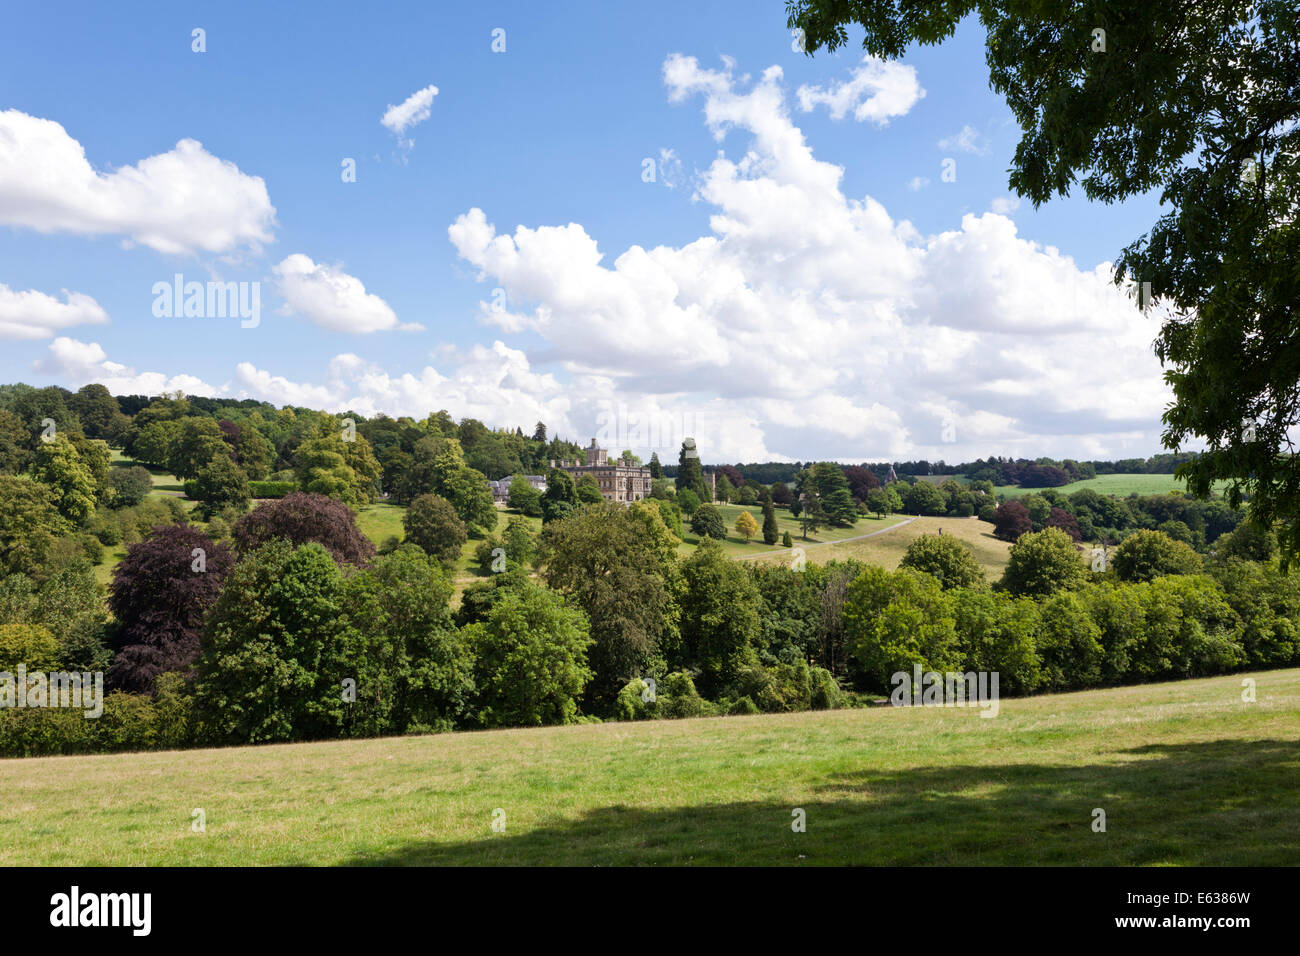 Rendcomb College - an independent, coeducational school on the Cotswolds at Rendcomb, Gloucestershire UK Stock Photo